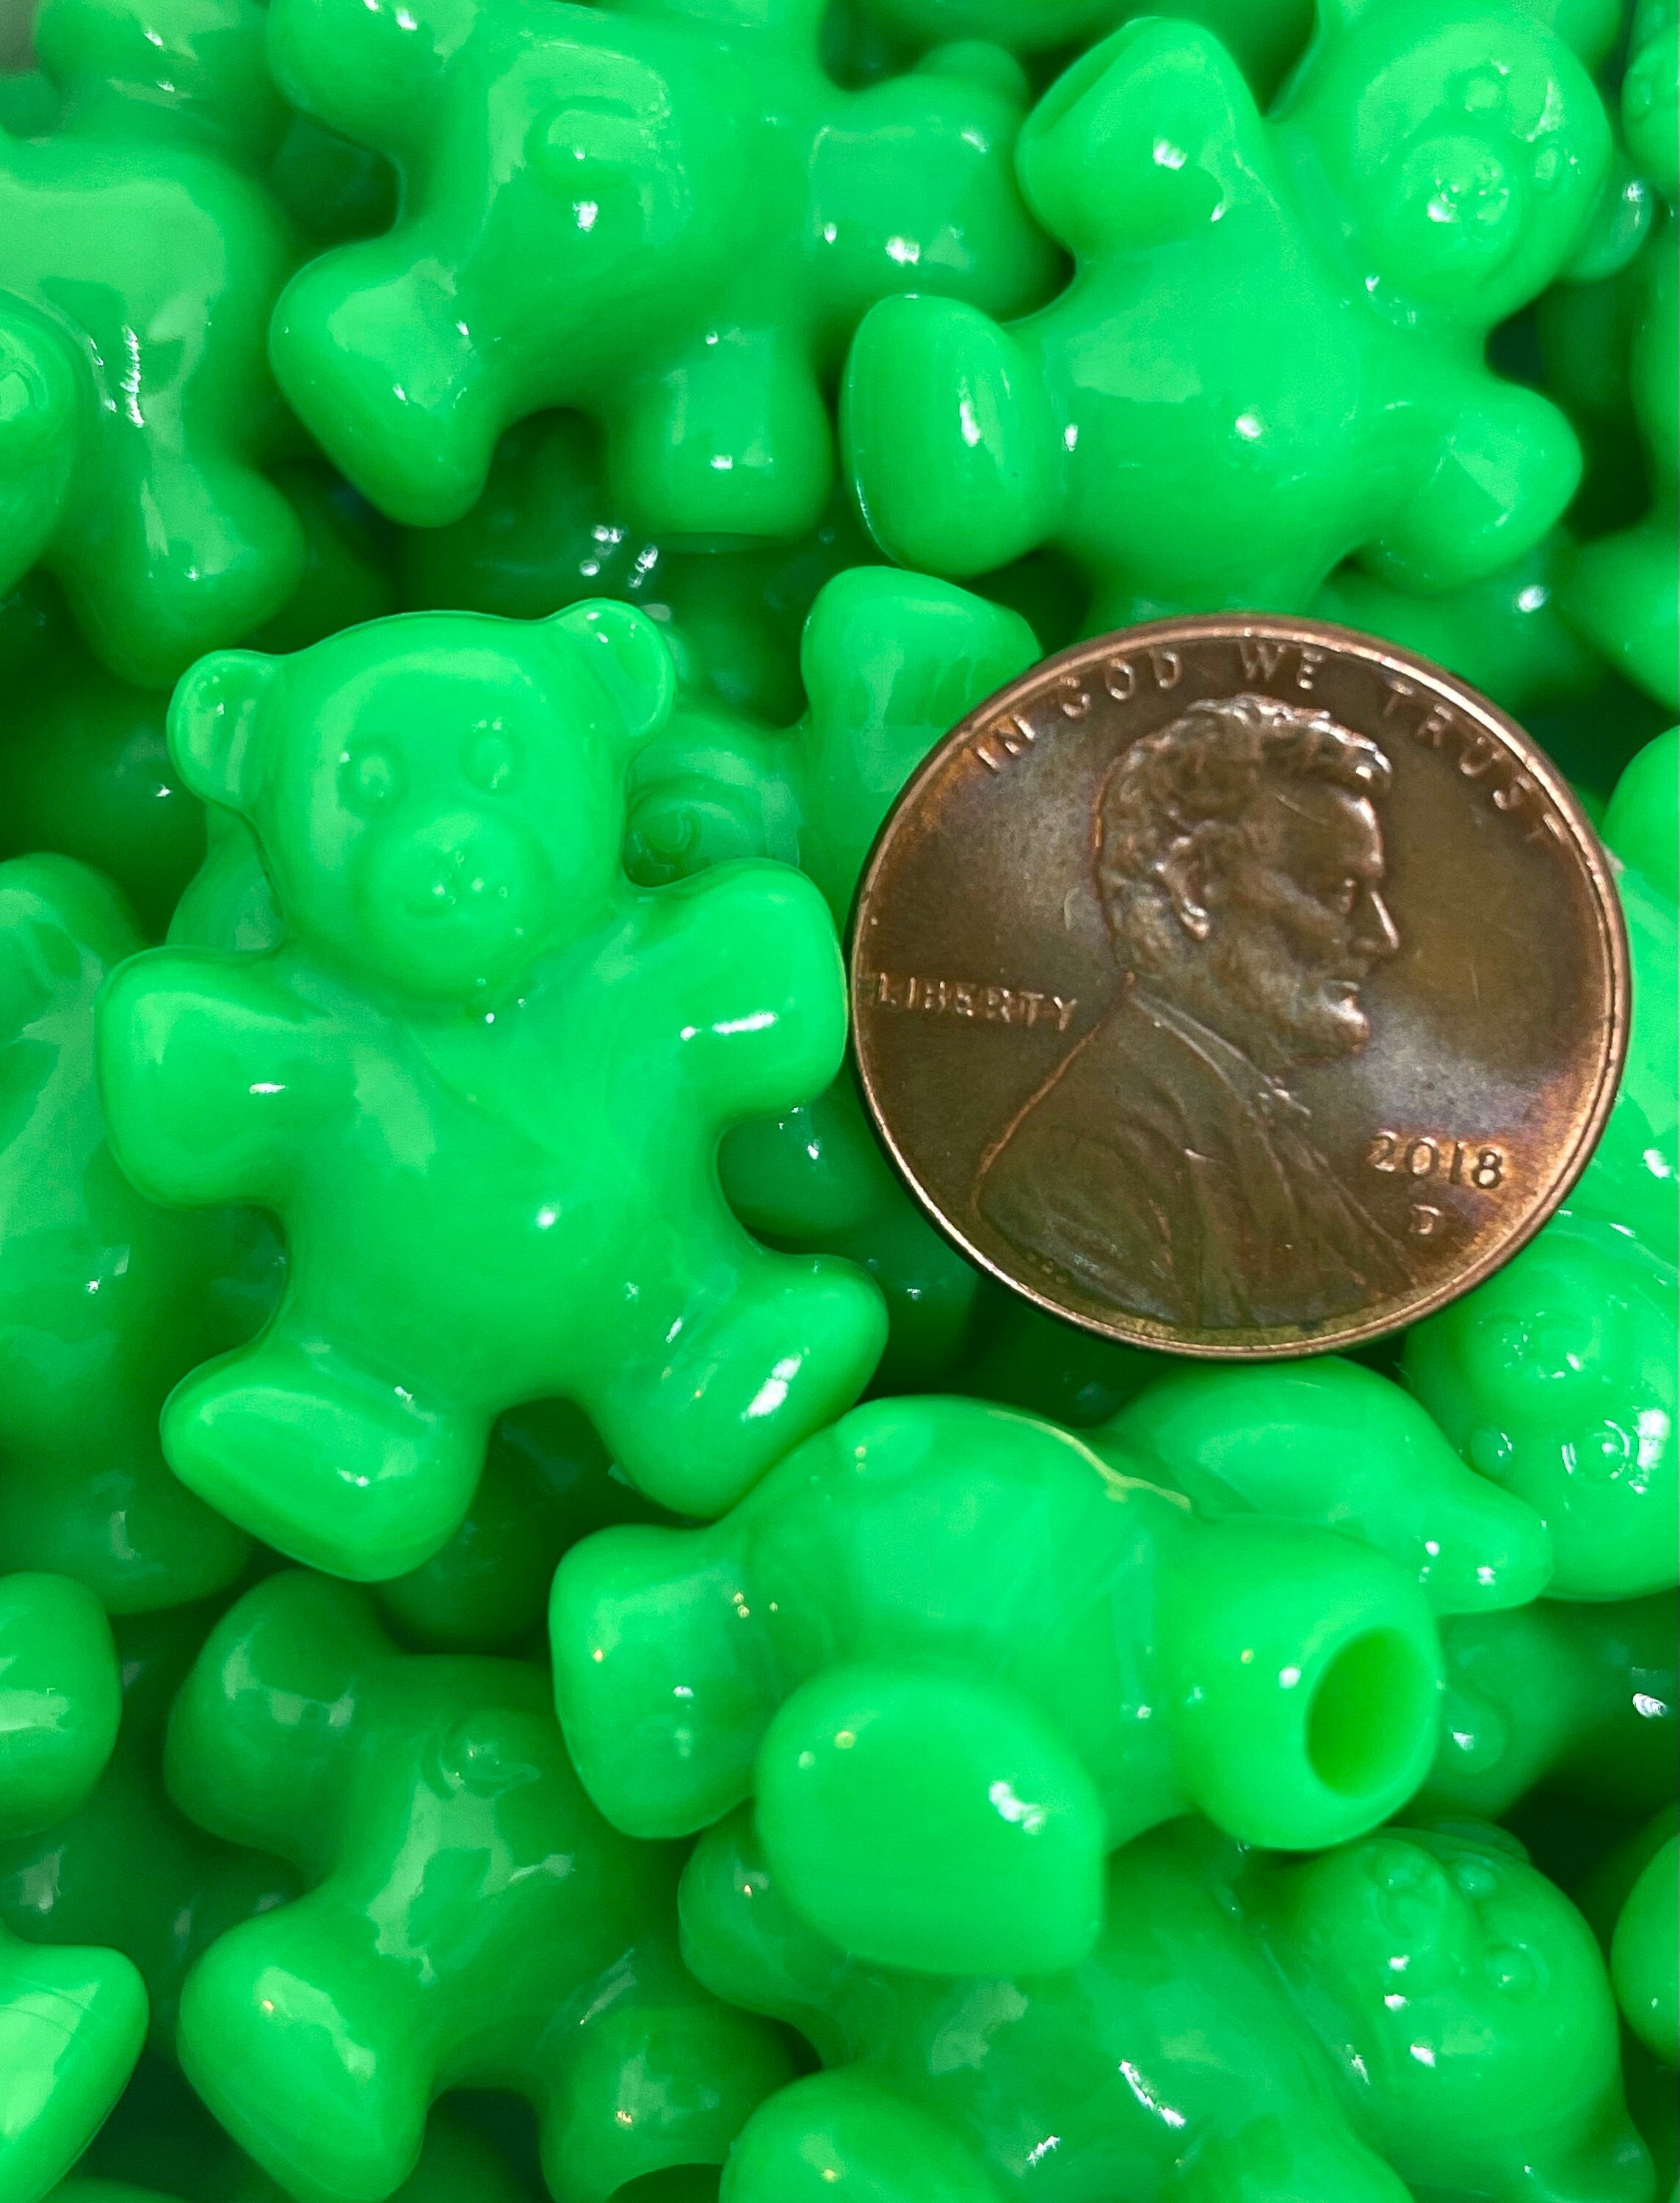 Neon Green Teddy Bear Beads for St Patricks Day, Green Beads for Jewelry Making, Saint Patrick's Day Jewelry, Charms, Pendants